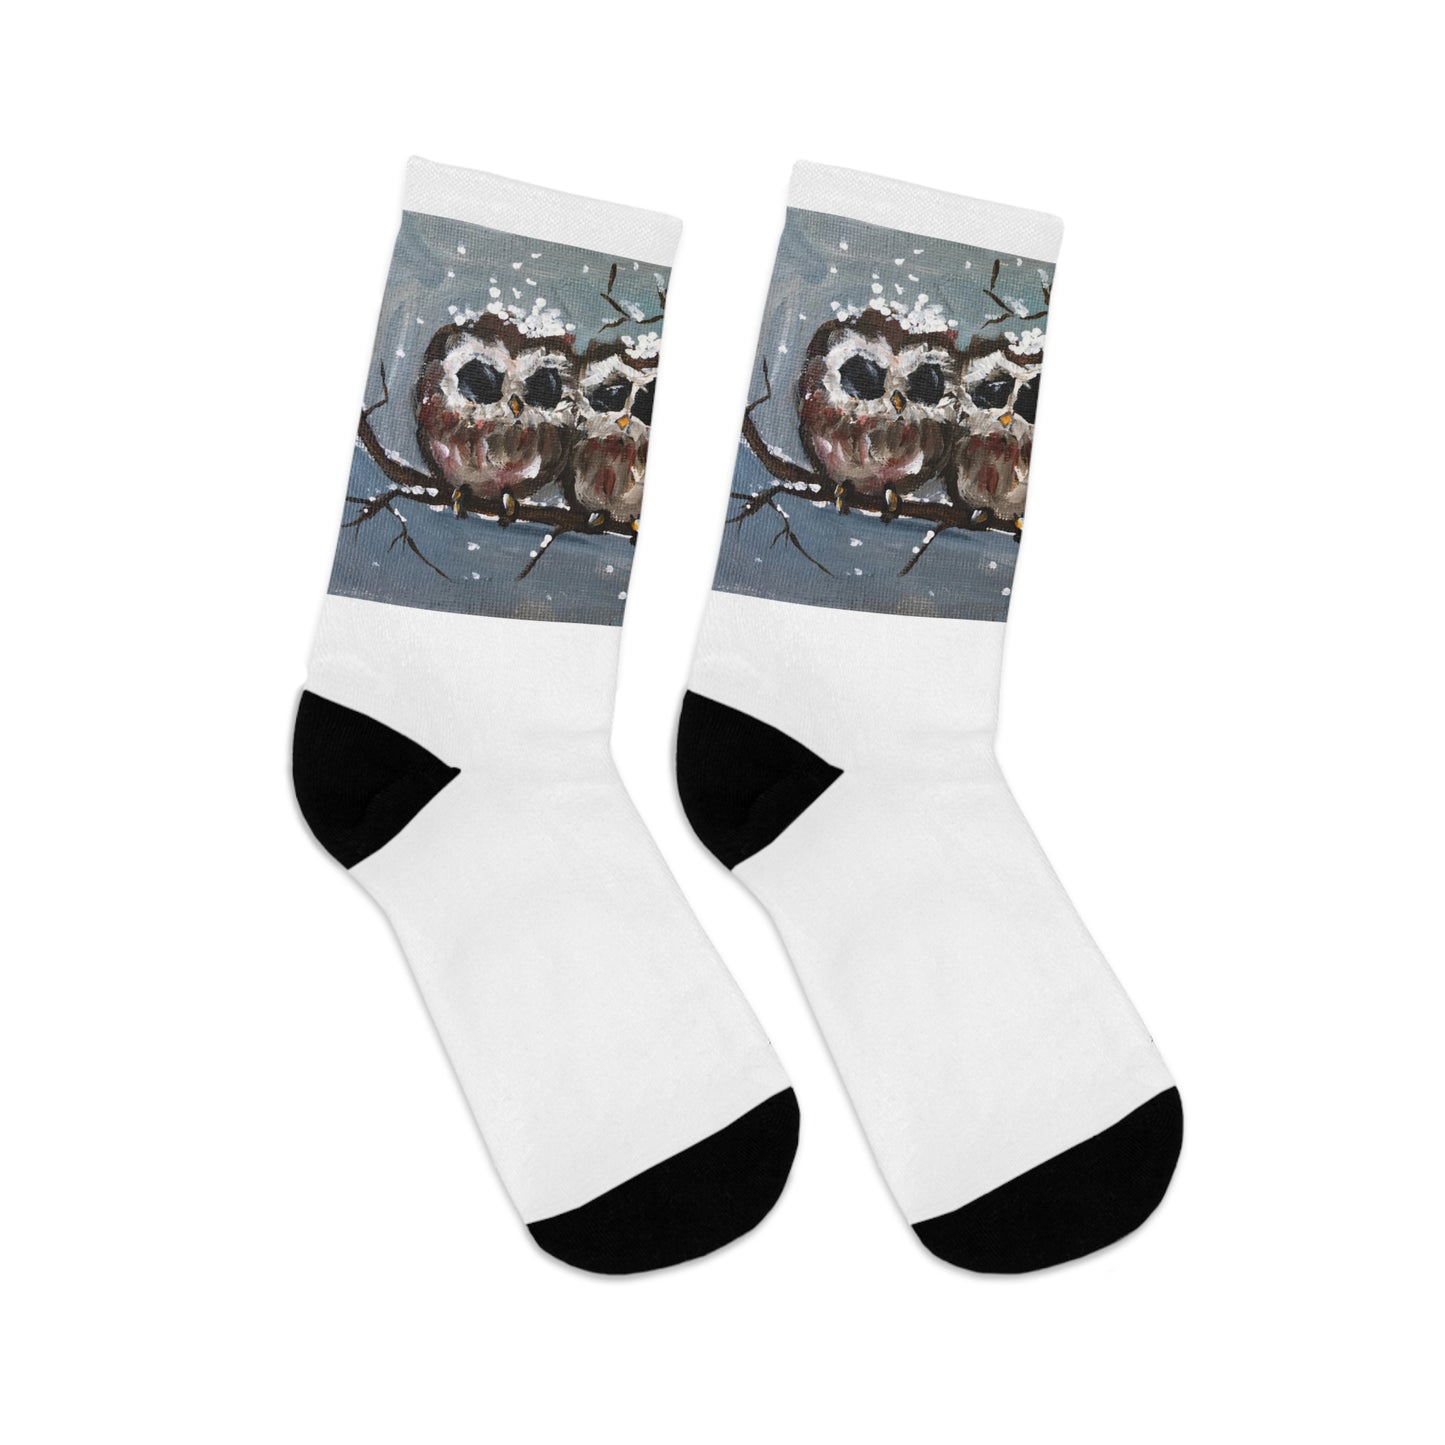 Who Us? Three Baby Owls in Snow White Socks